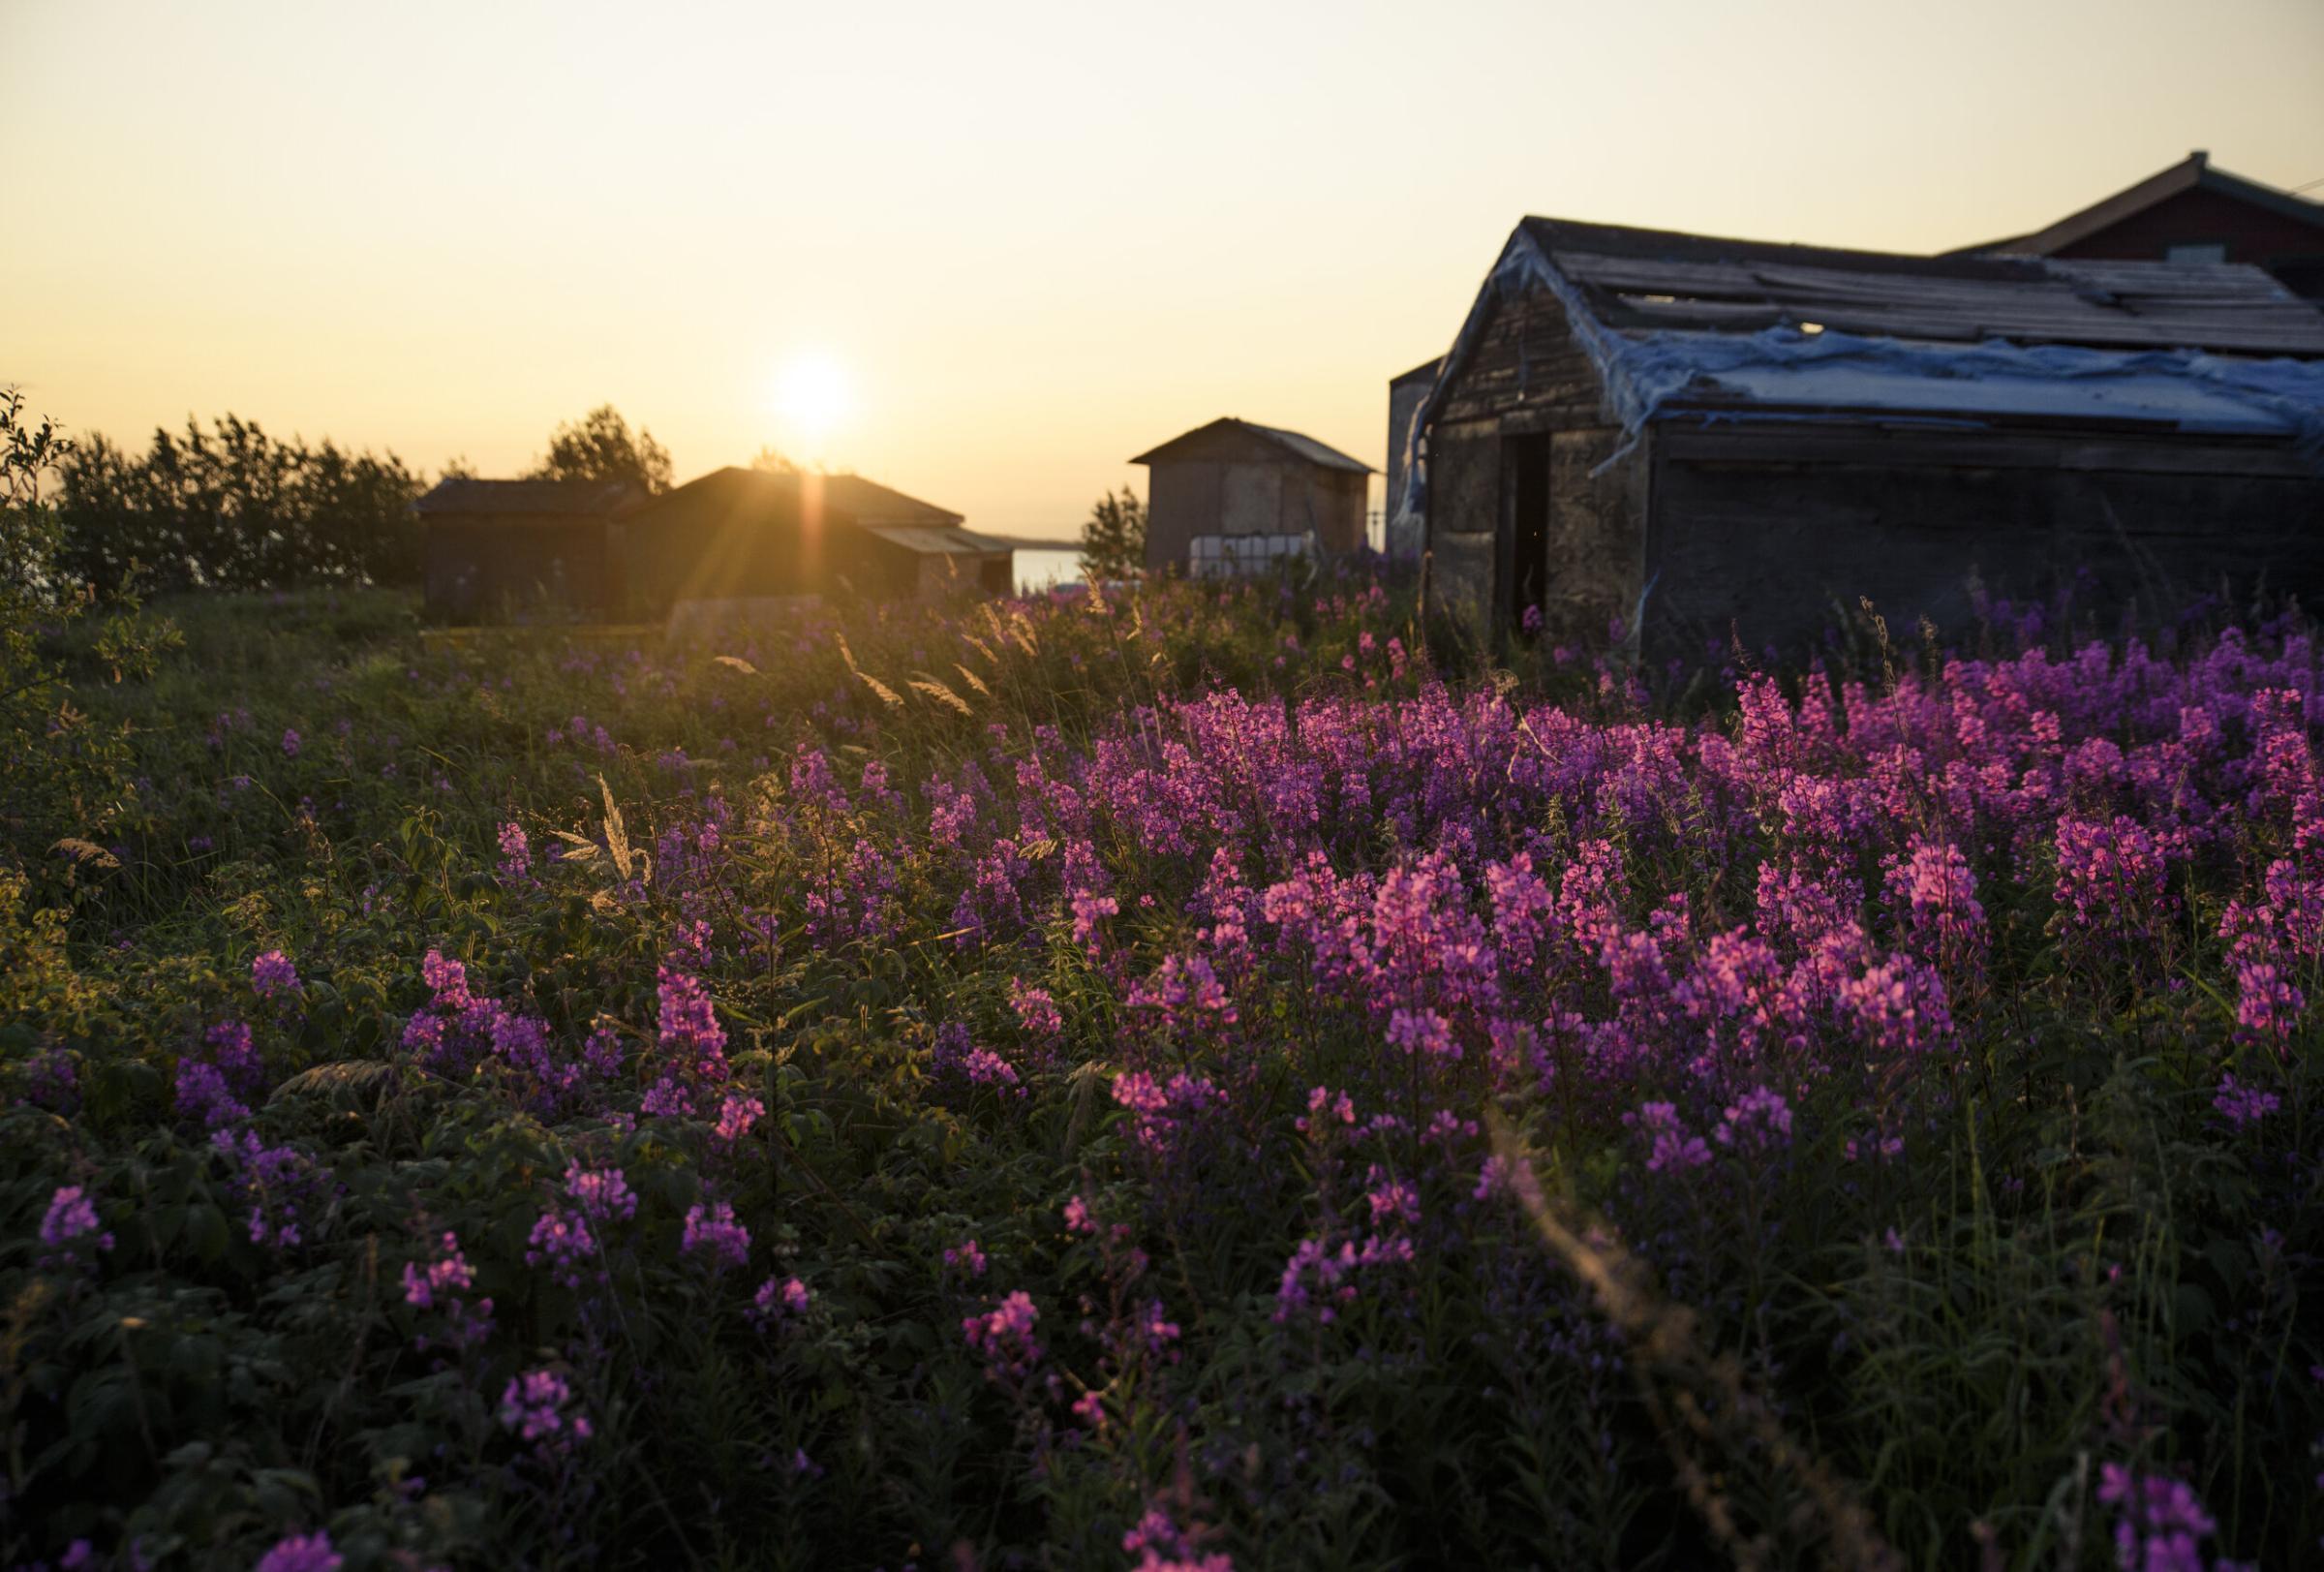 Land of The Ancestors - The sunset lights up a patch of fireweed in Łutsel...